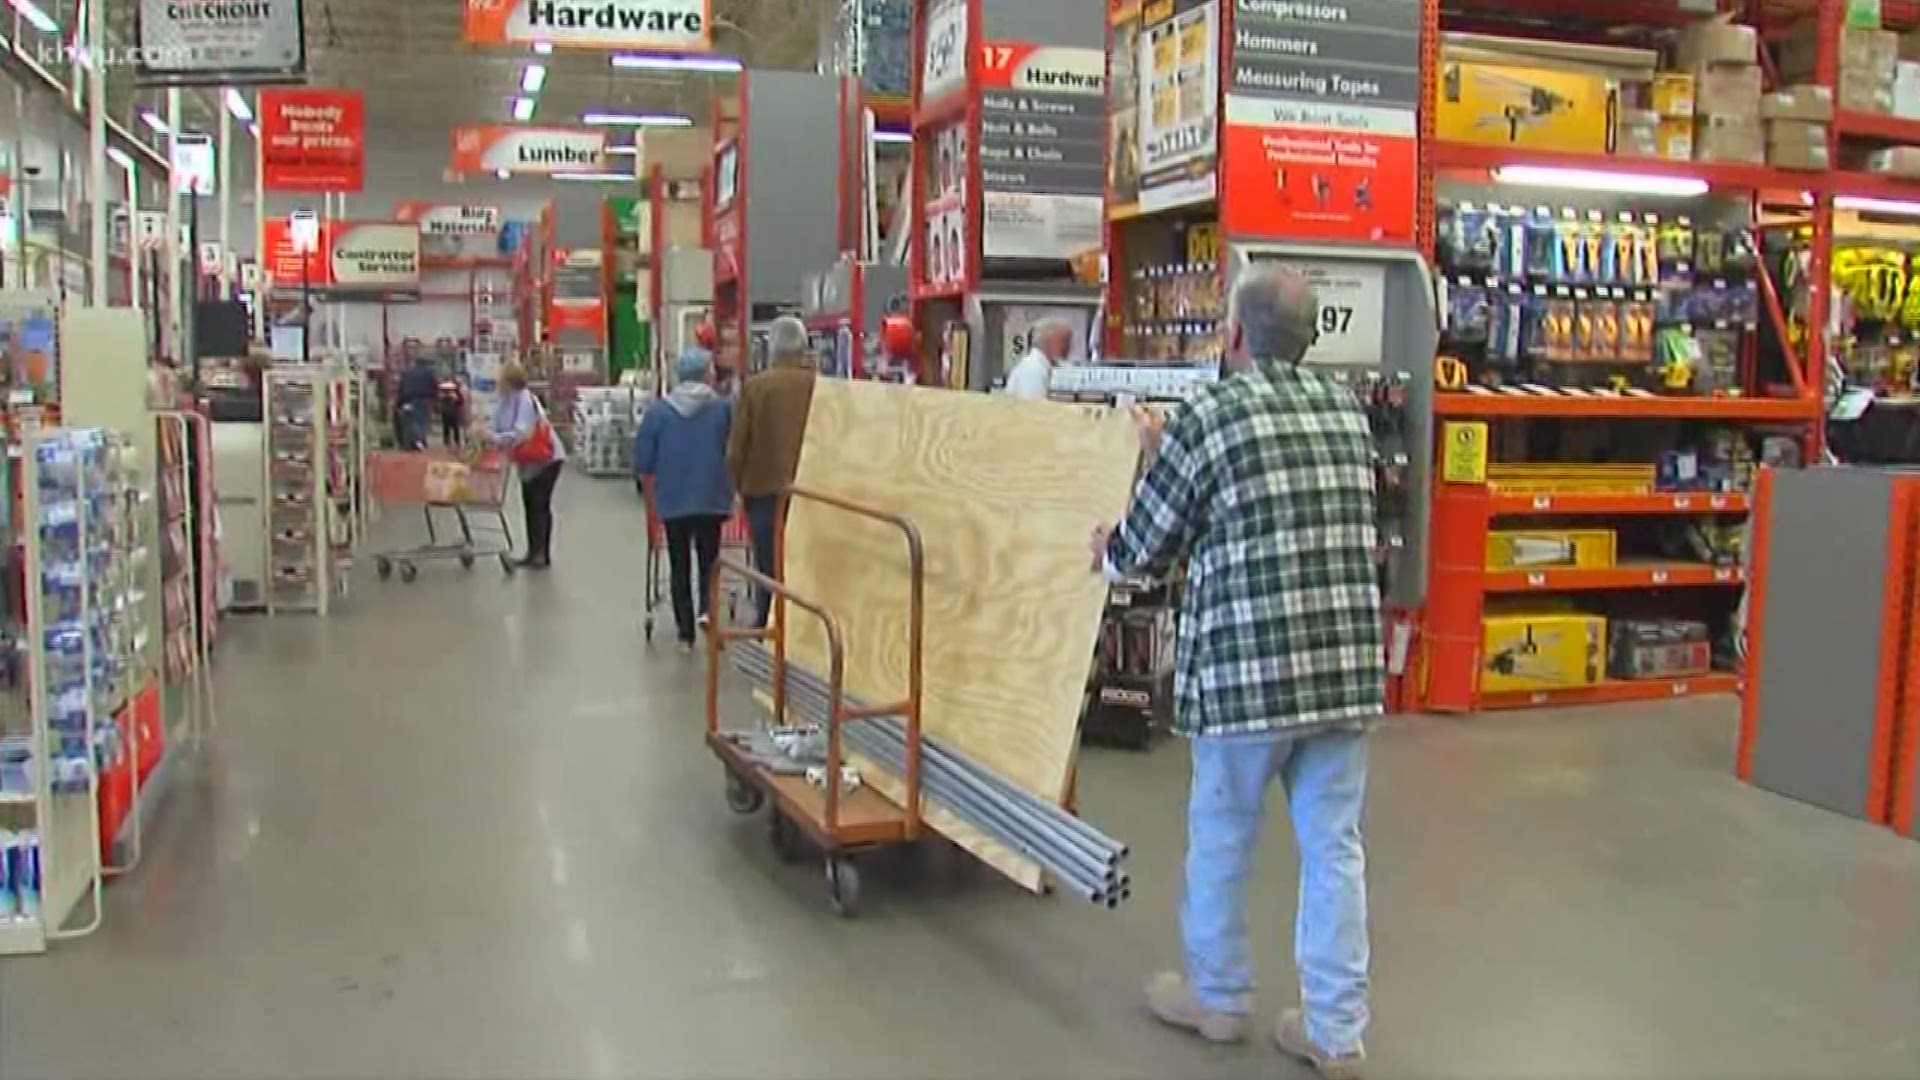 If you're looking to put in some work around the house this spring which store offers the most bang for your buck? Consumer reporter John Matarese puts Lowes and Home Depot to the test so you don't waste your money.